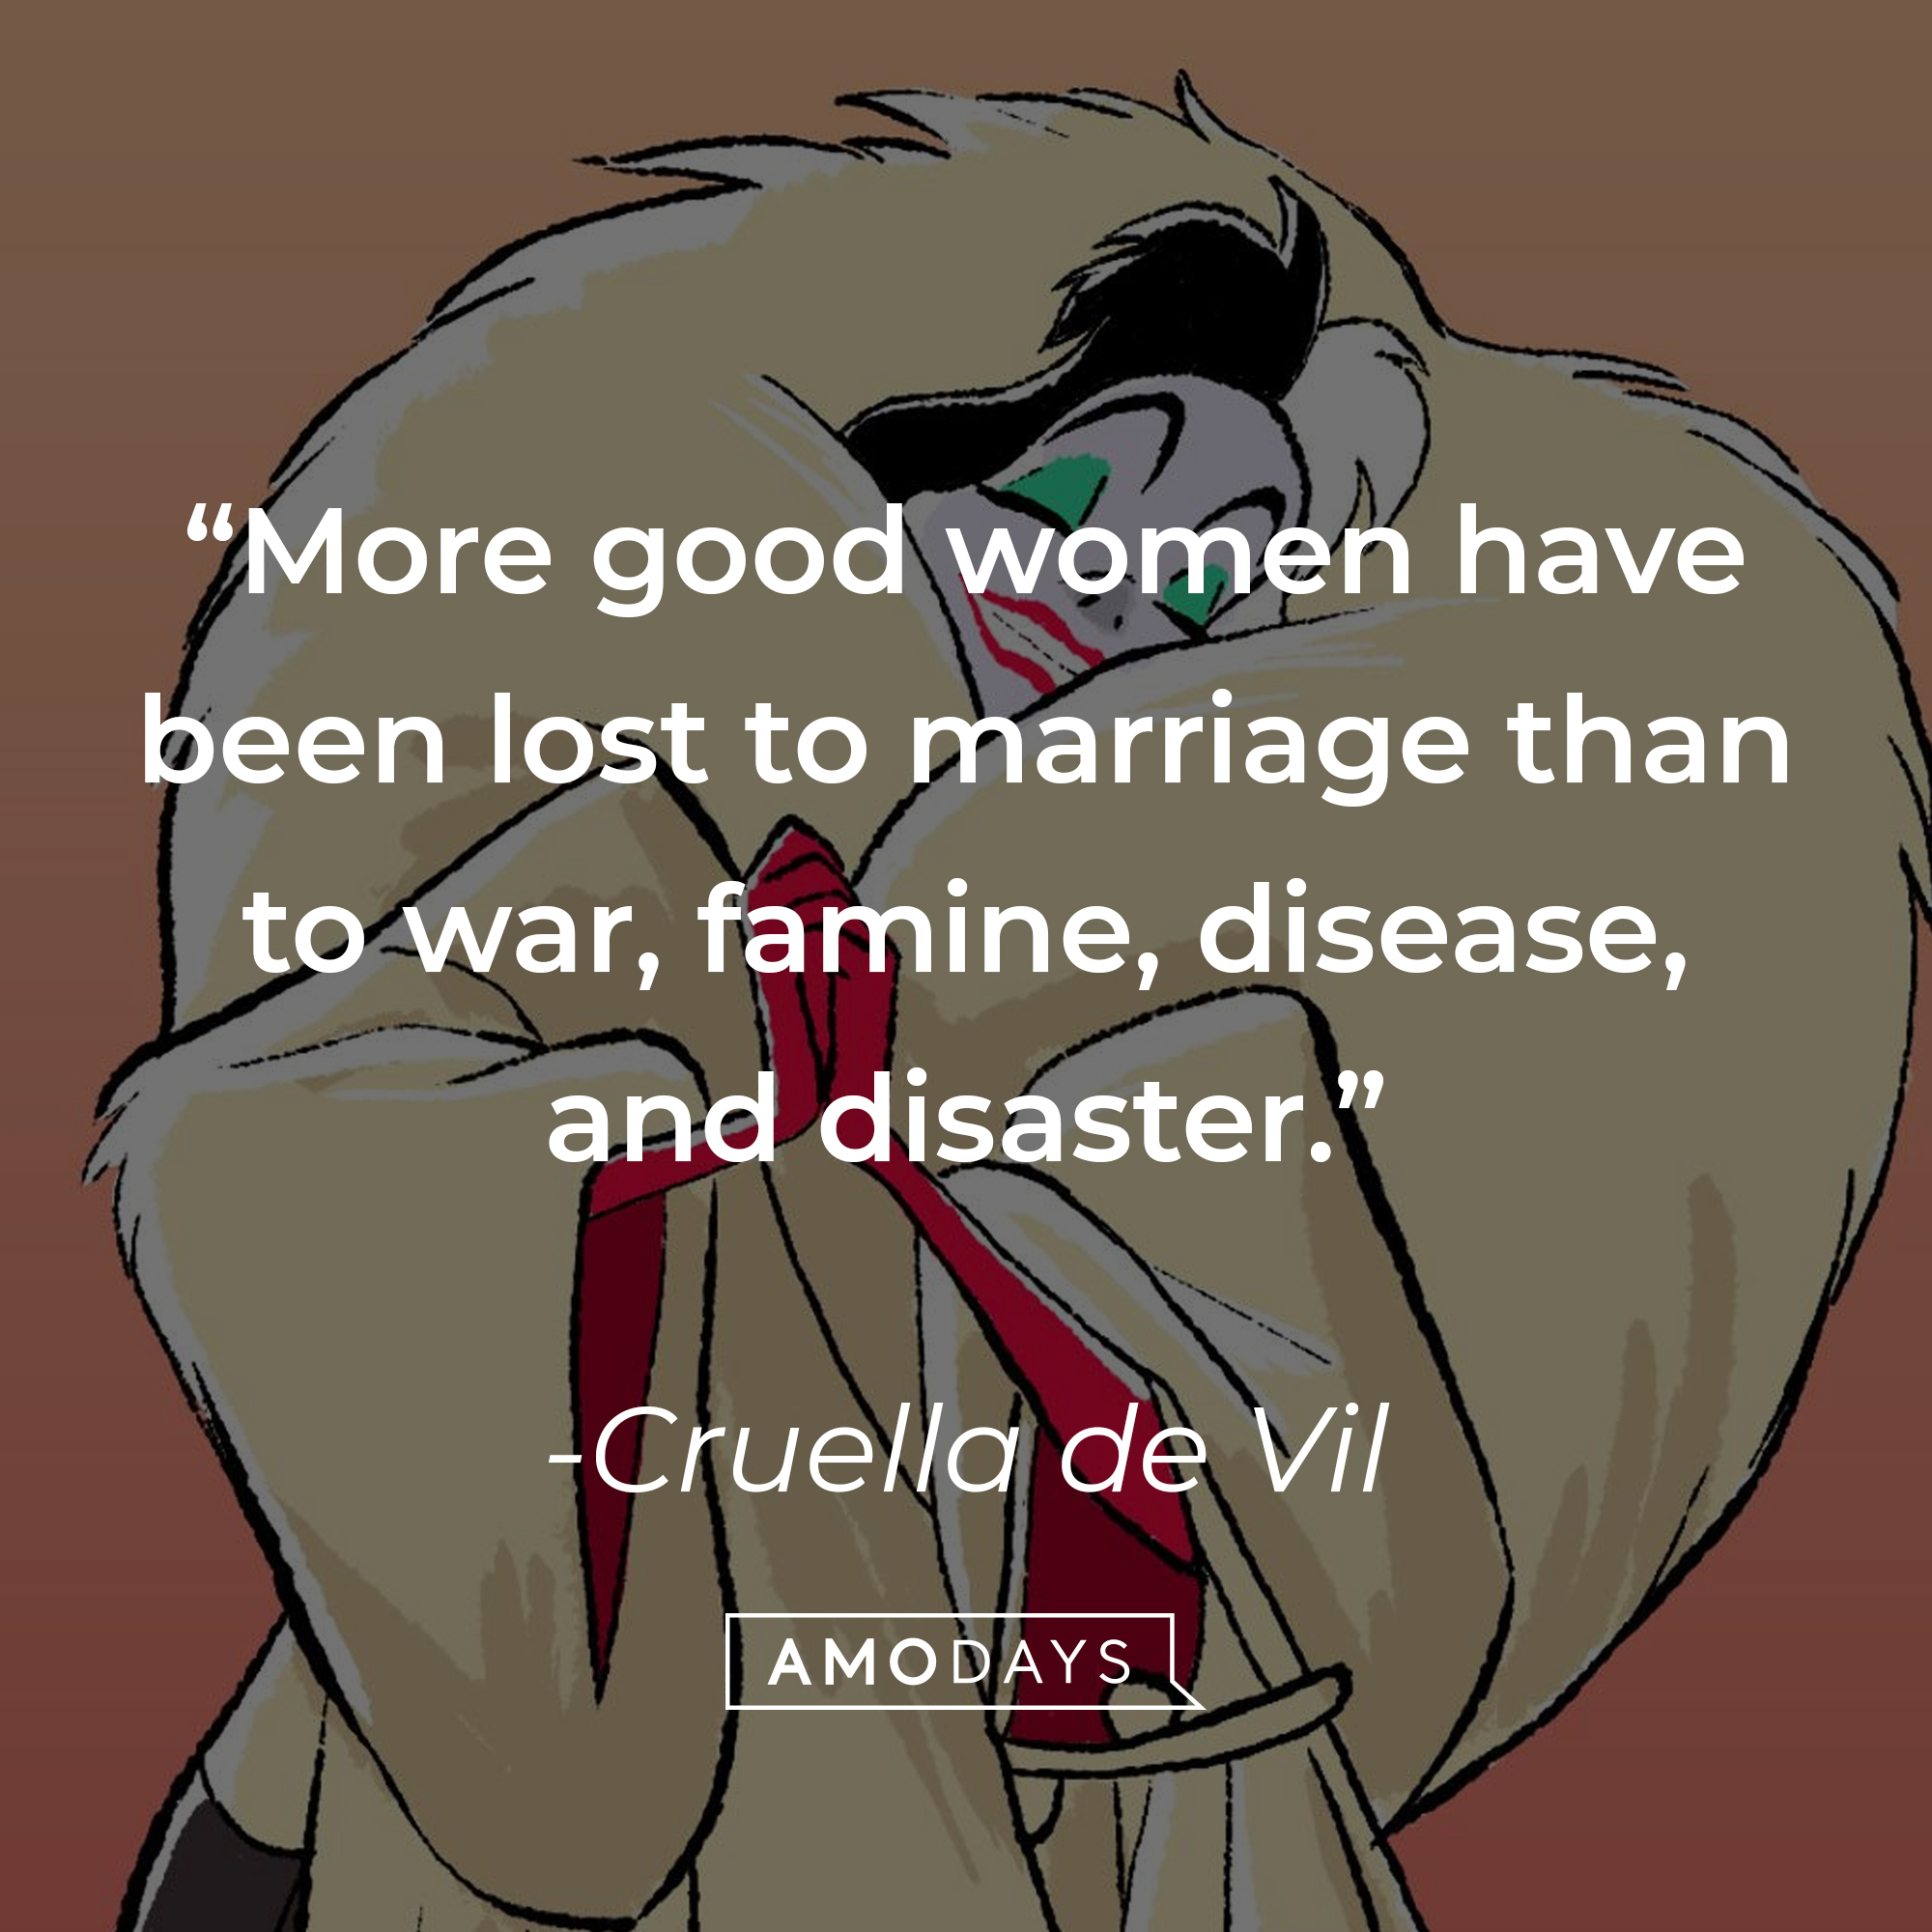 An image of the animated Cruella de Vil, with a quote from the same adapted character in the 1996 film “101 Dalmatians”: “More good women have been lost to marriage than to war, famine, disease, and disaster.”  | Source: Facebook.com/DisneyCruellaDeVil